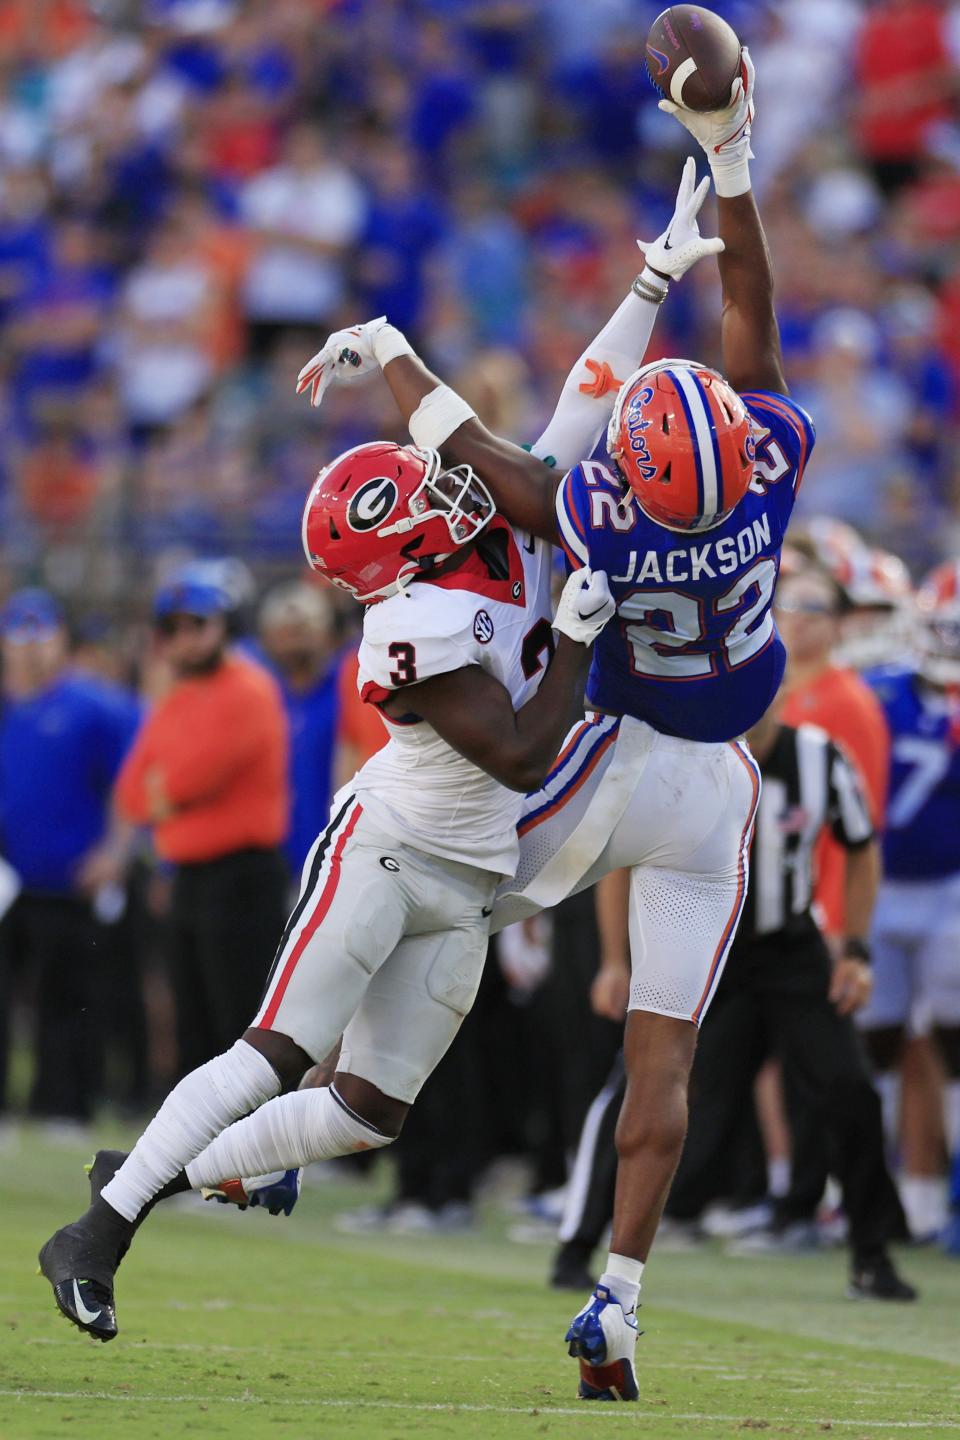 Georgia Bulldogs defensive back Kamari Lassiter (3) breaks up a pass intended for Florida Gators wide receiver Kahleil Jackson (22) during the second quarter of an NCAA Football game Saturday, Oct. 28, 2023 at EverBank Stadium in Jacksonville, Fla. [Corey Perrine/Florida Times-Union]